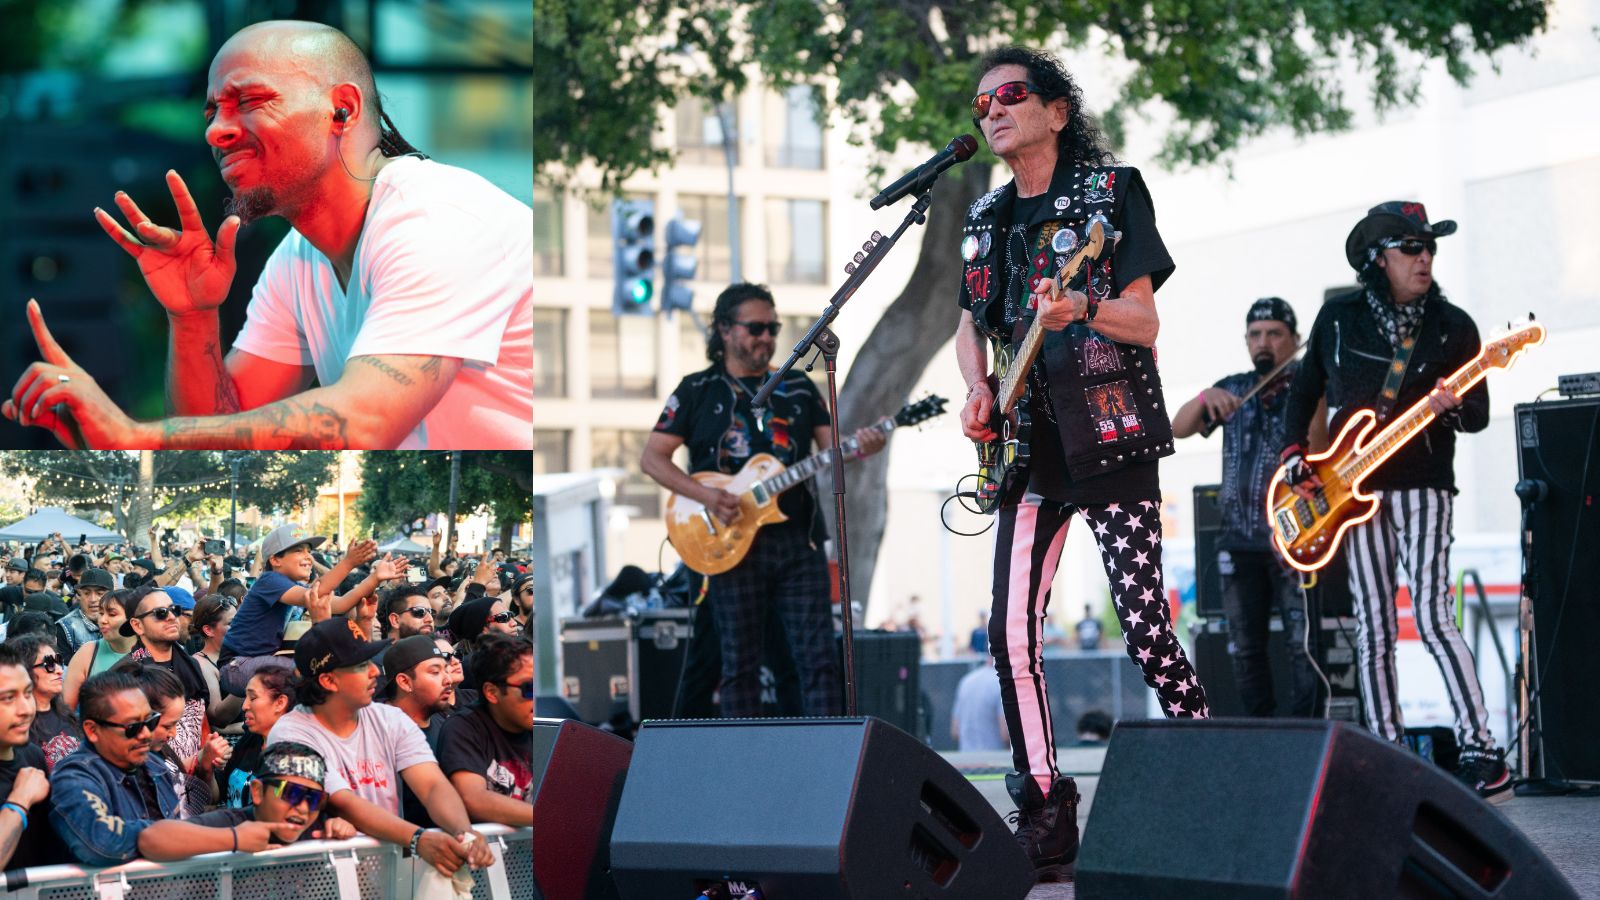 A Historic Moment for Accessibility: Comcast Partners with Mexican Rock Band EL TRI to Provide ASL Interpreters for the First Time at Music in the Park